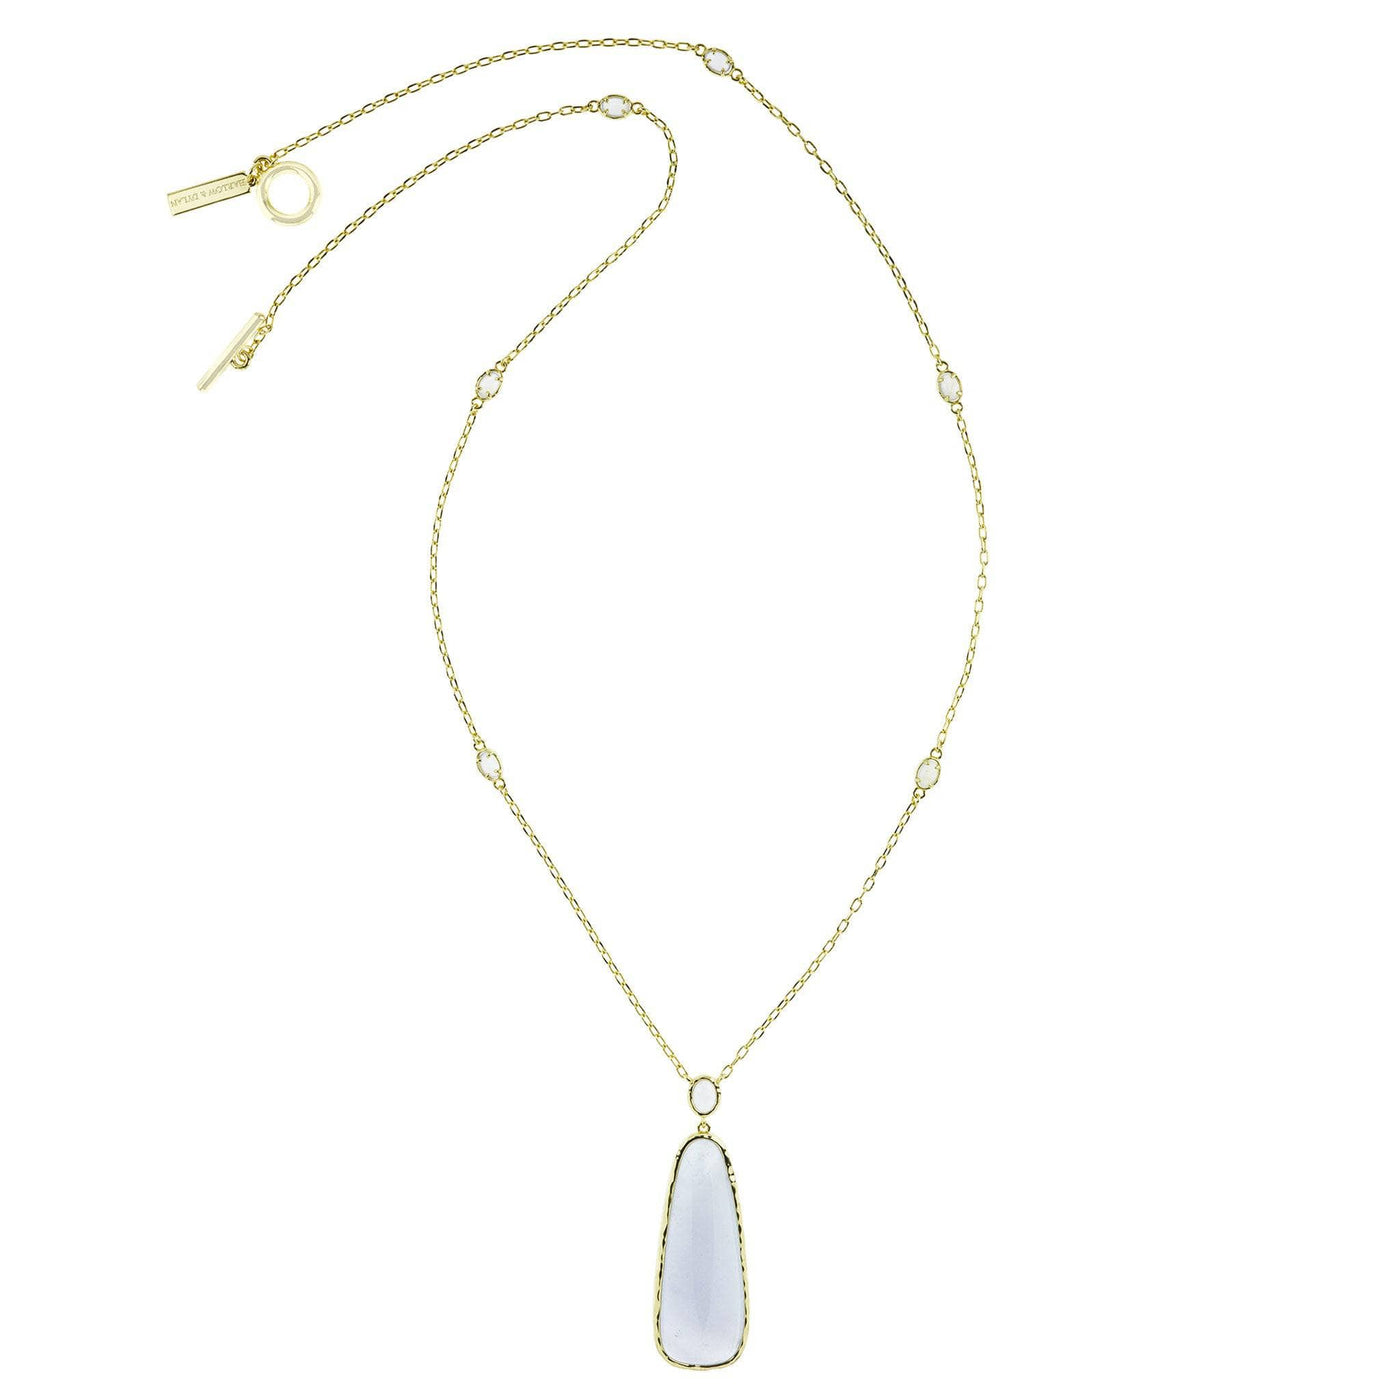 Harlow & Dylan By HEIDI DAUS®"Blue Chalcedony" Natural Beauty Pendant Necklace